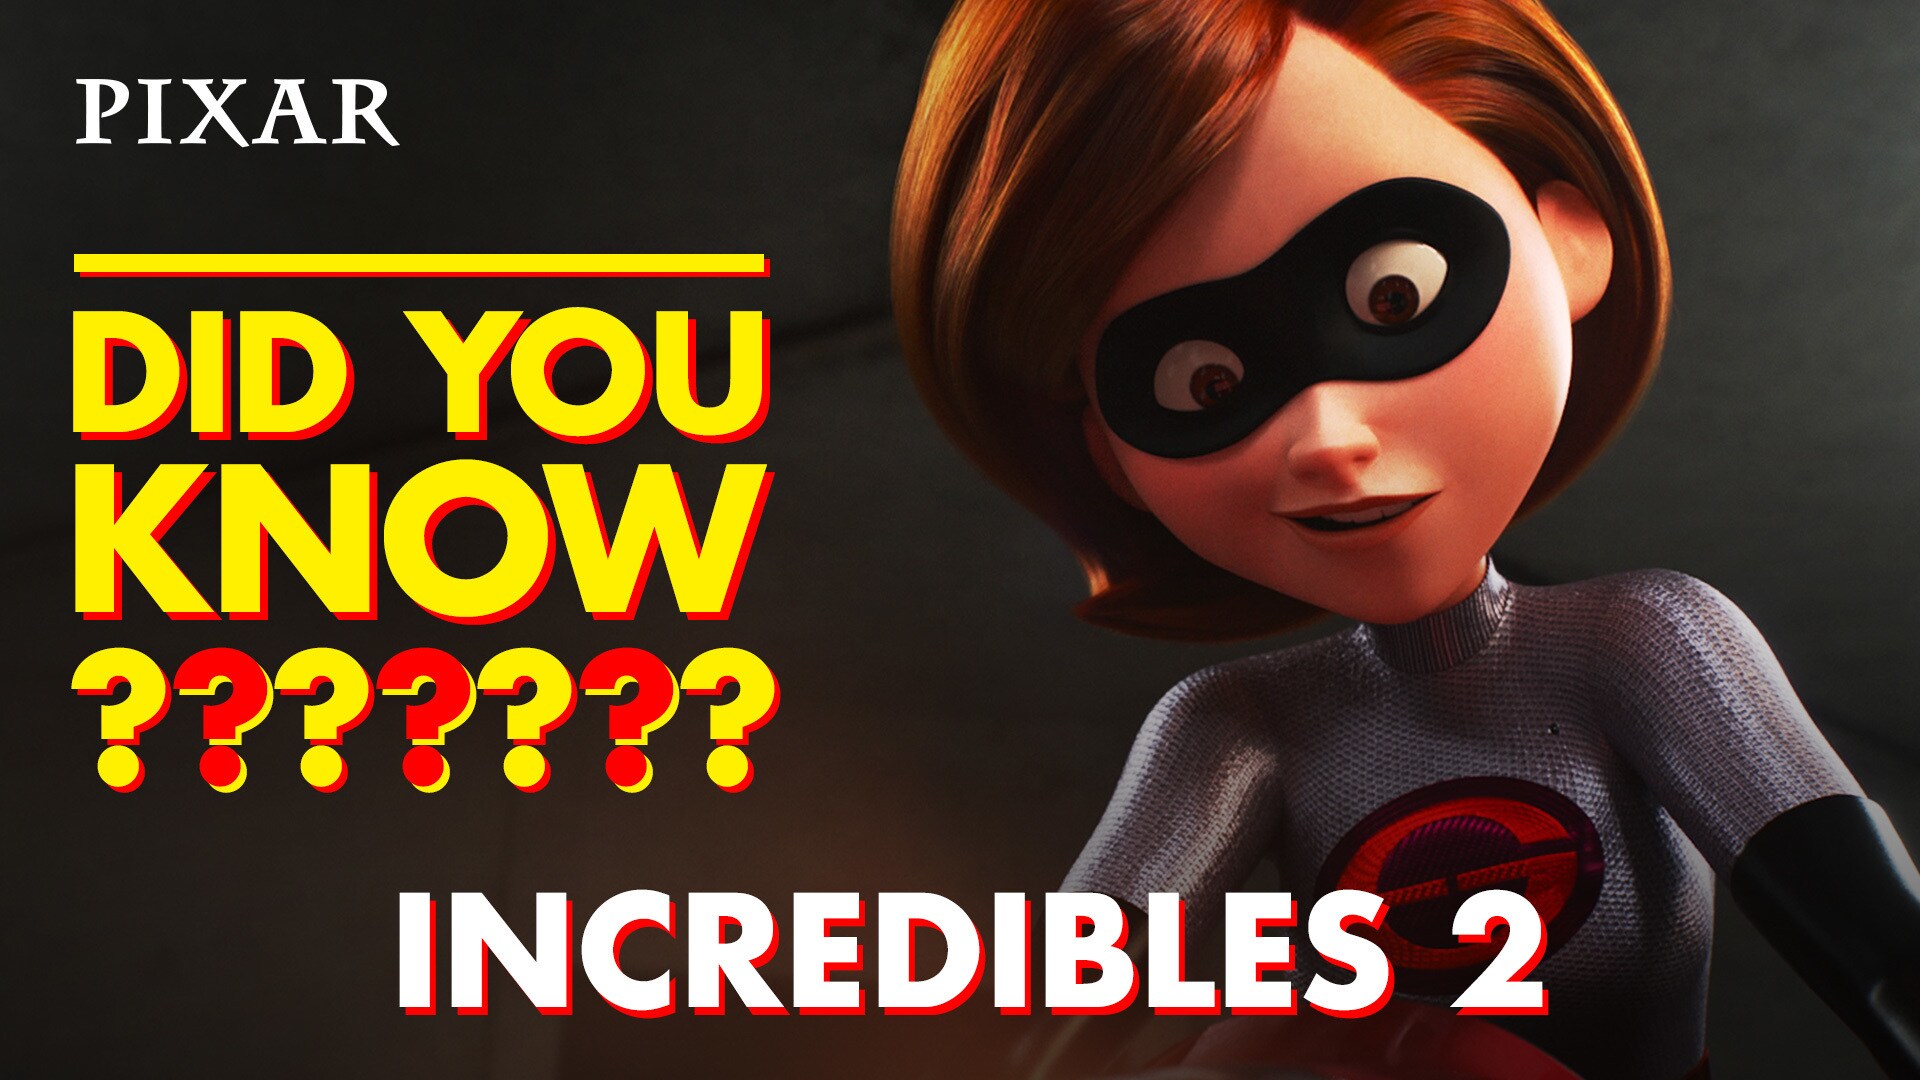 Incredibles 2 Fun Facts | Pixar Did You Know?